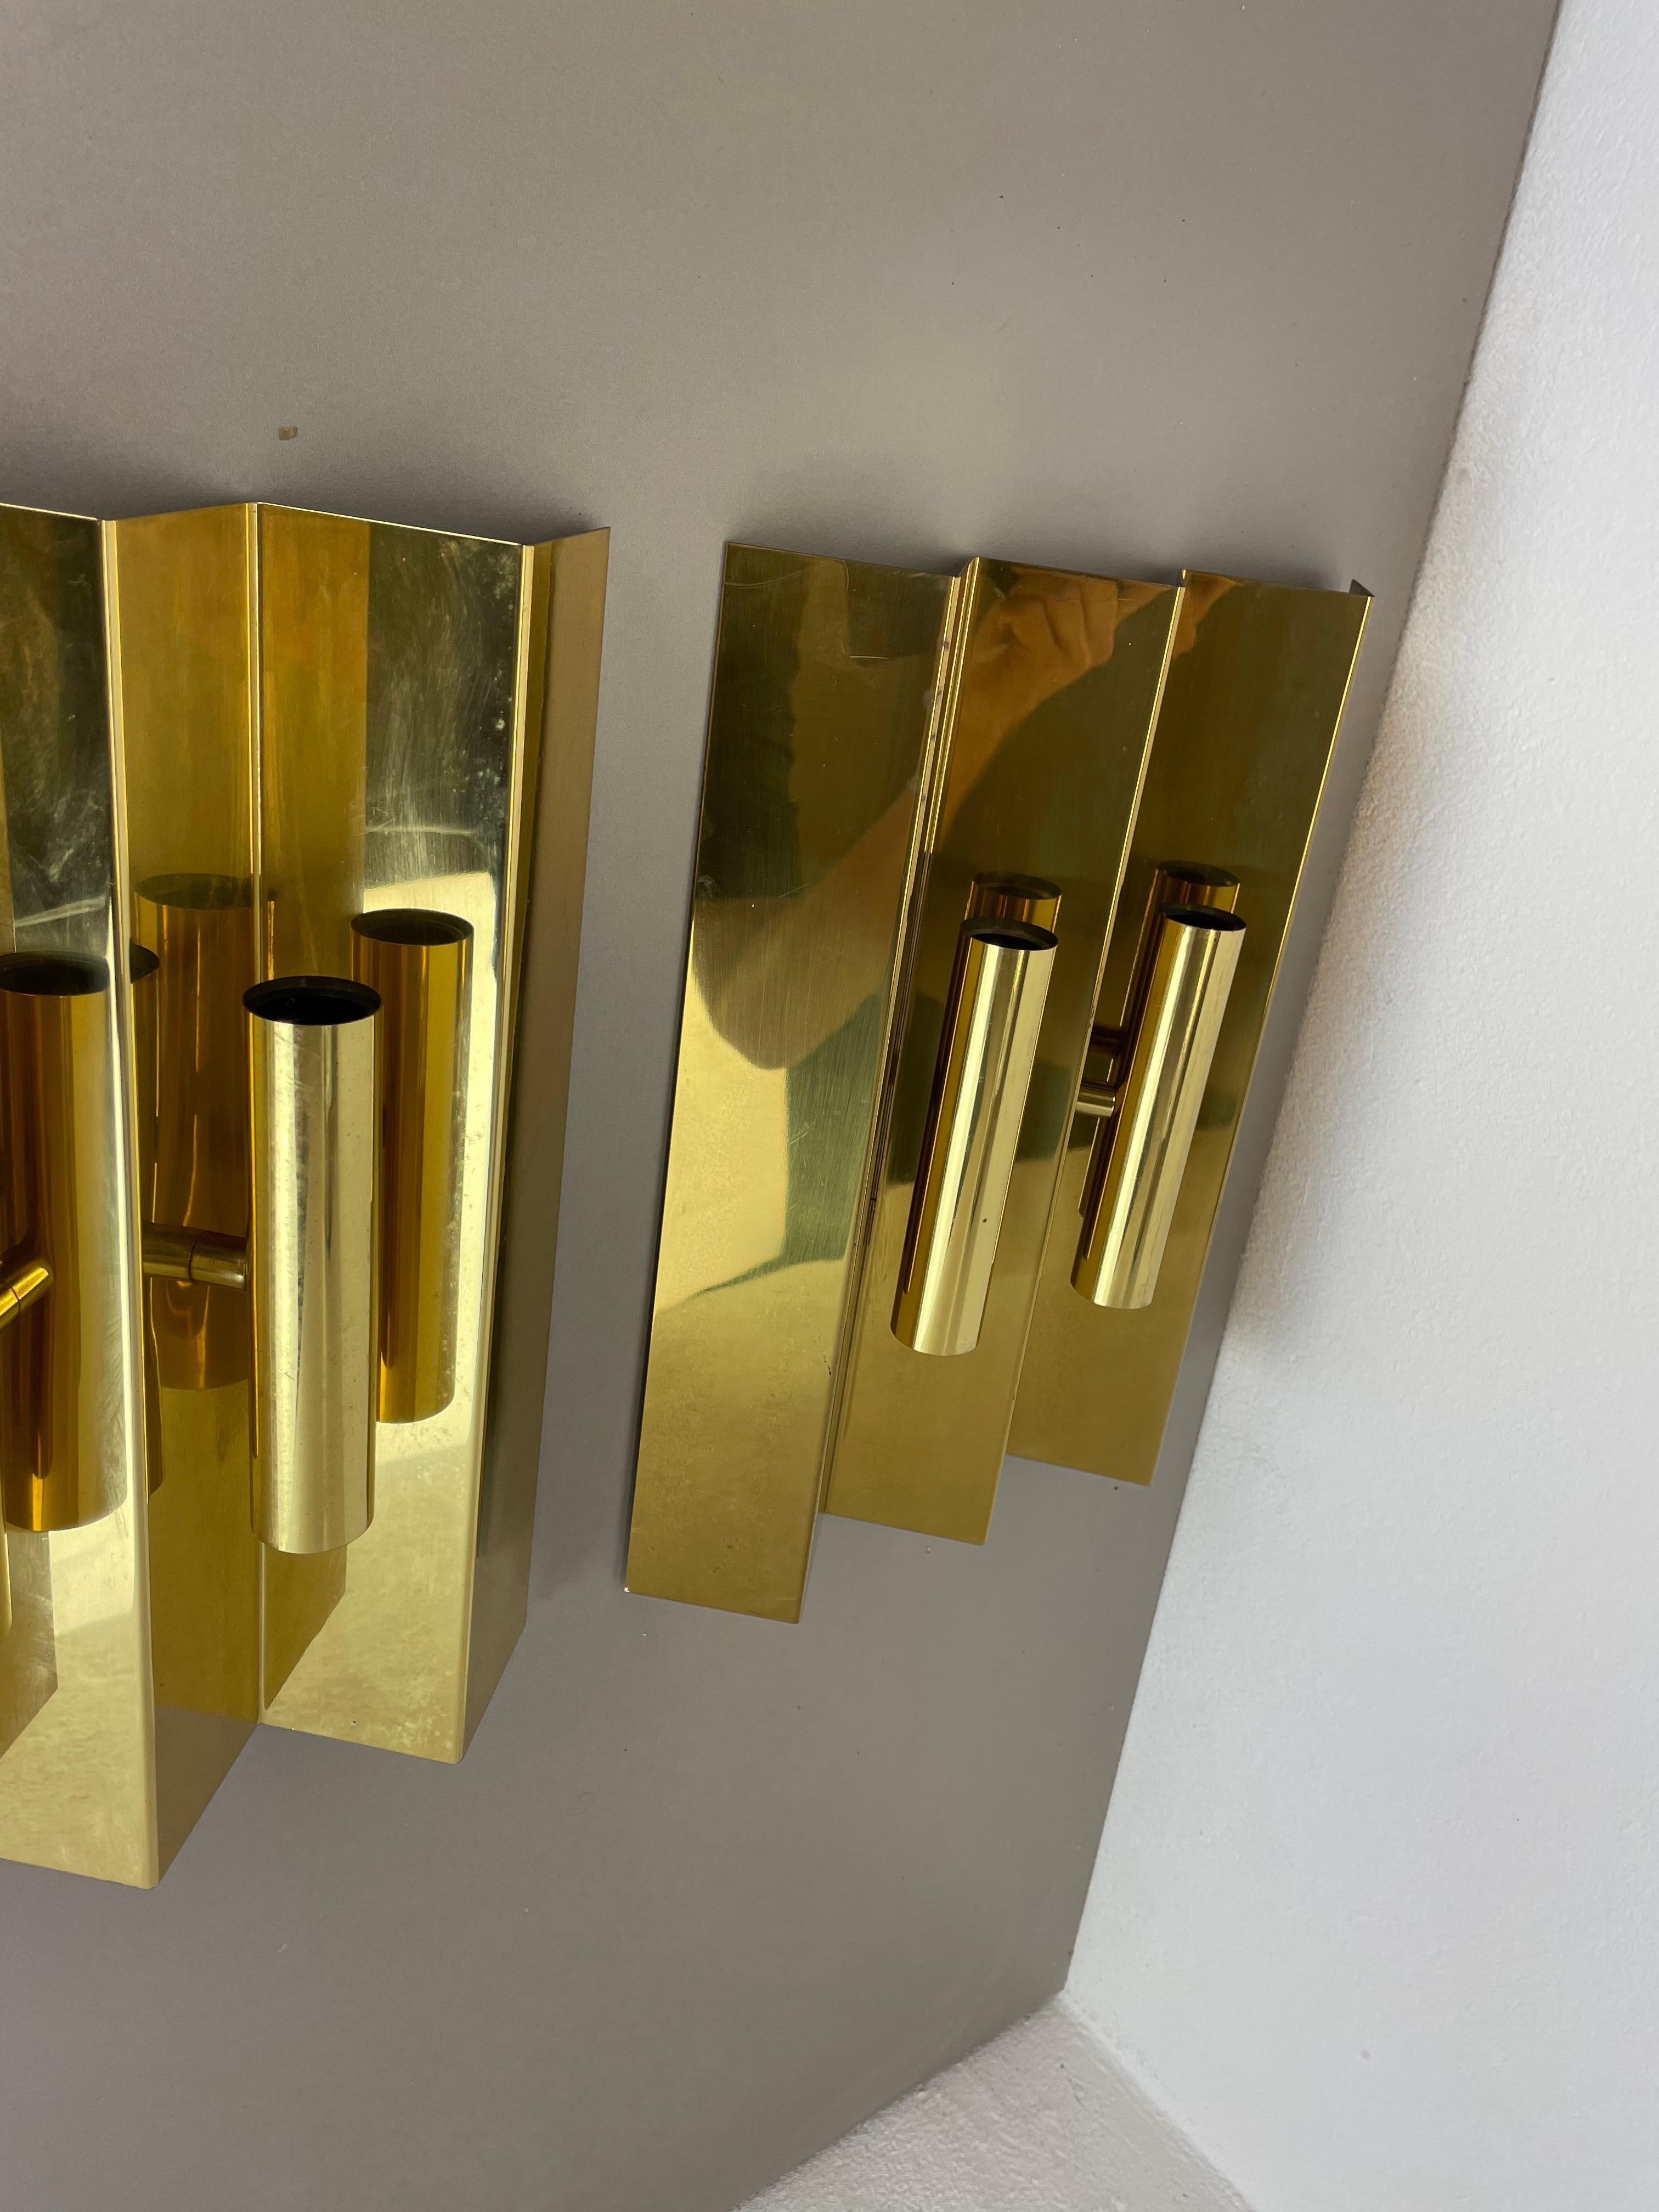 Set of 2 solid Brass Stilnovo Style Wall Light By WKR Leuchten, Germany 1970s For Sale 2